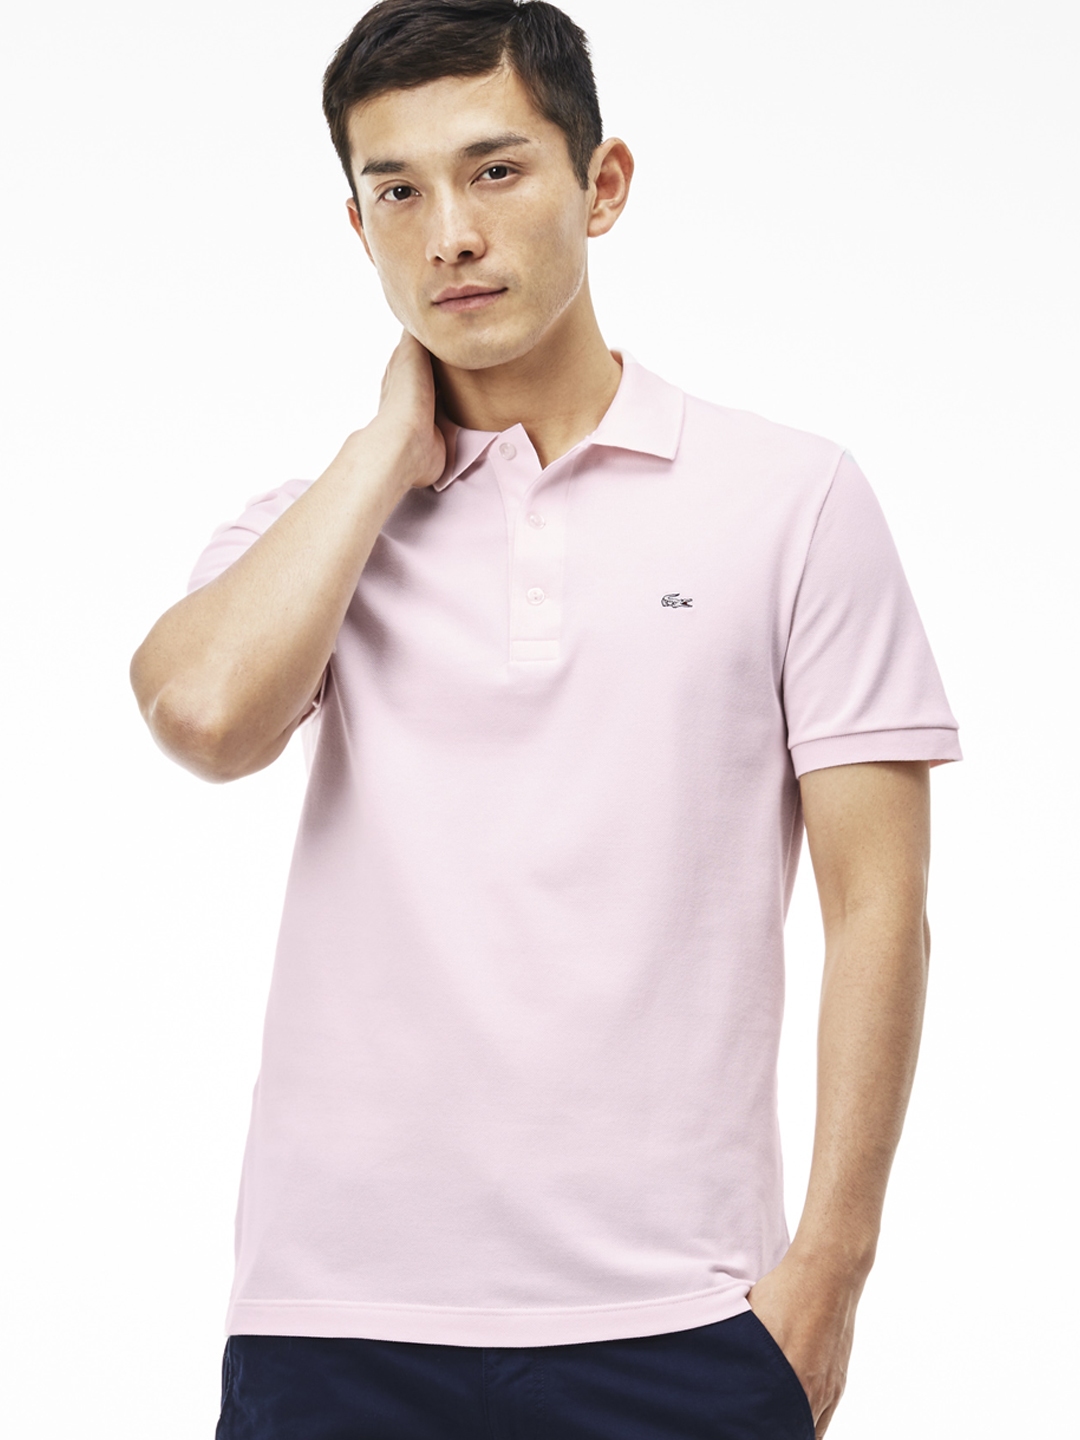 mens pink lacoste t shirt